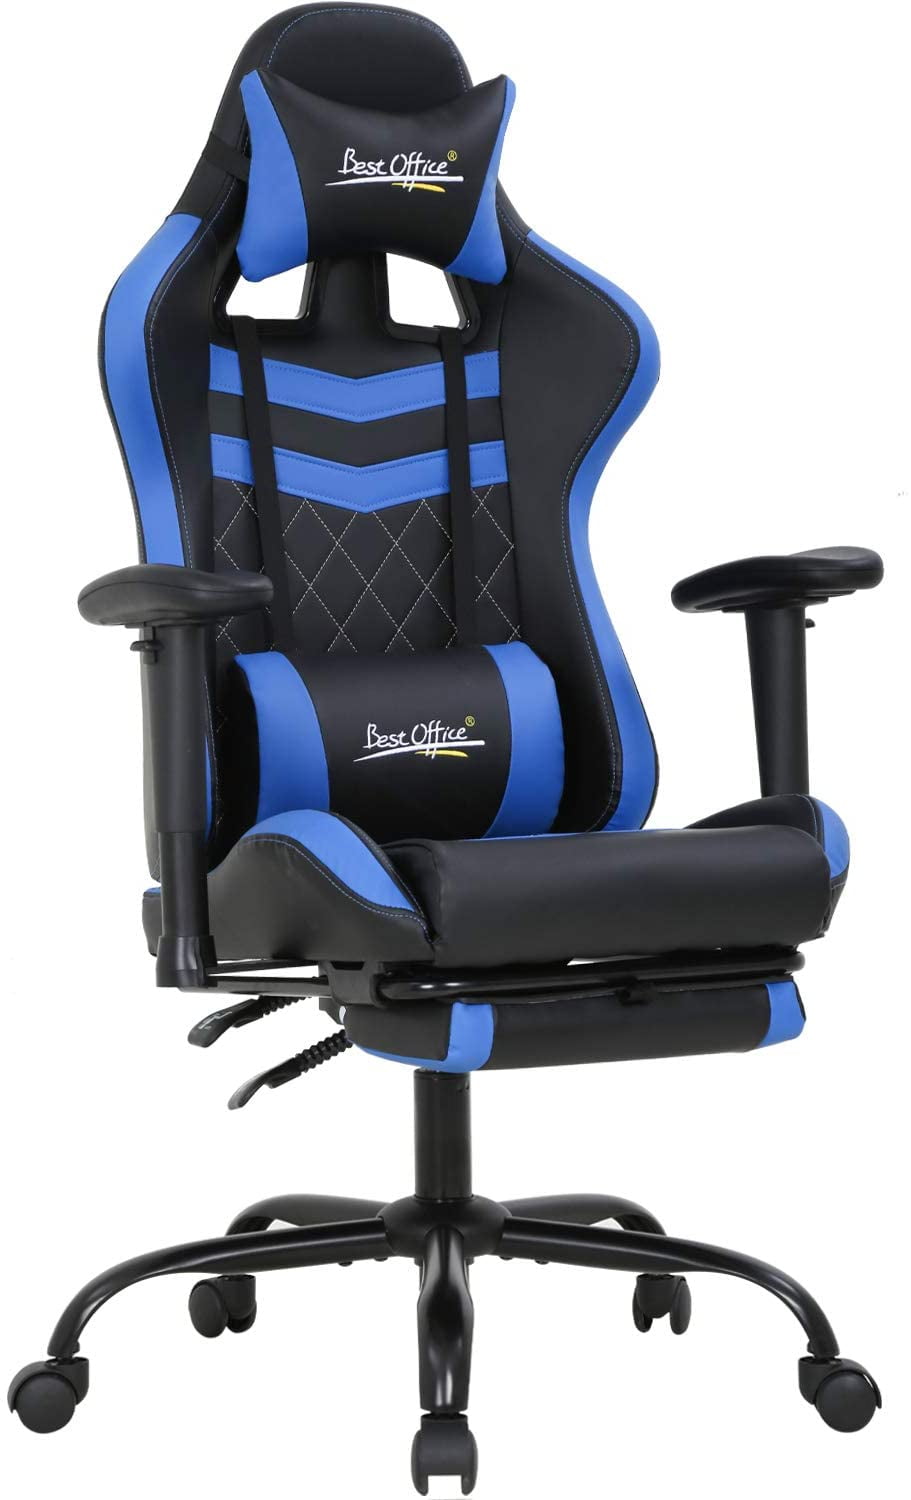 nozama Gaming Chair Recliner Esports Chair High Back Swivel Gaming Desk Chair with Headrest and Waist Cushion Adjustable Height Gaming Chair for Adult Gaming Chair Leather Office Swivel Chairs Blue 